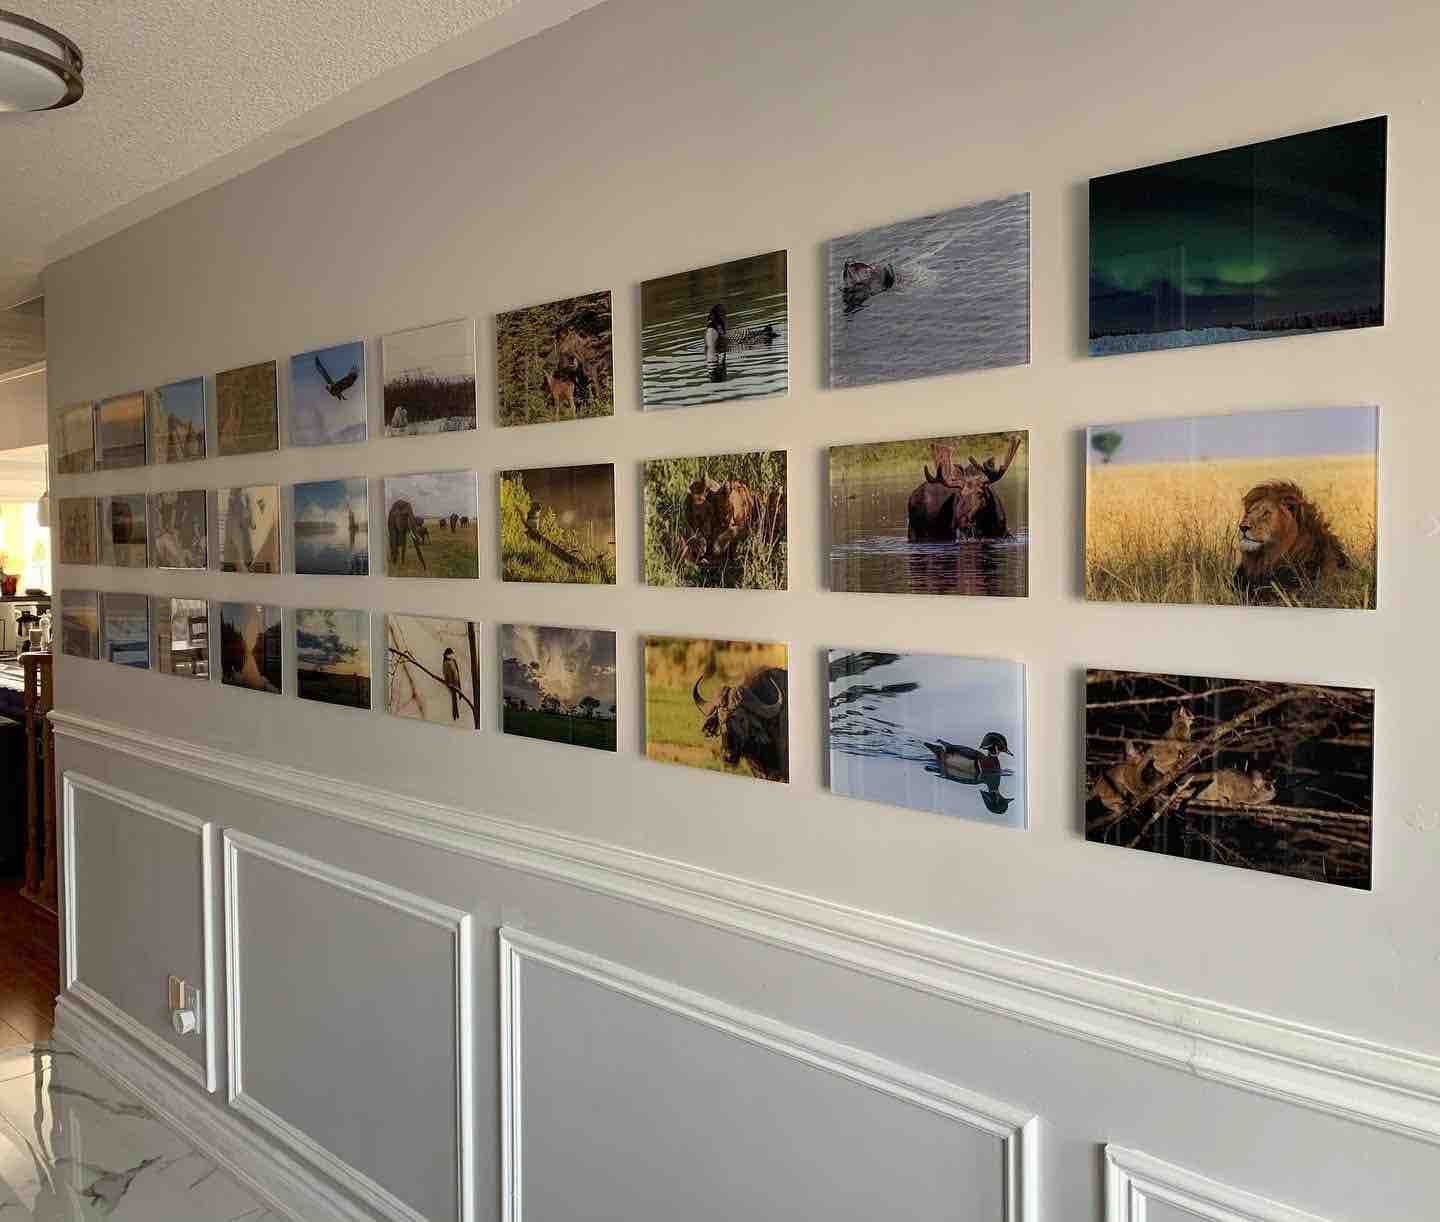 Gallery Wall of Acrylic Prints Displayed in Hallway